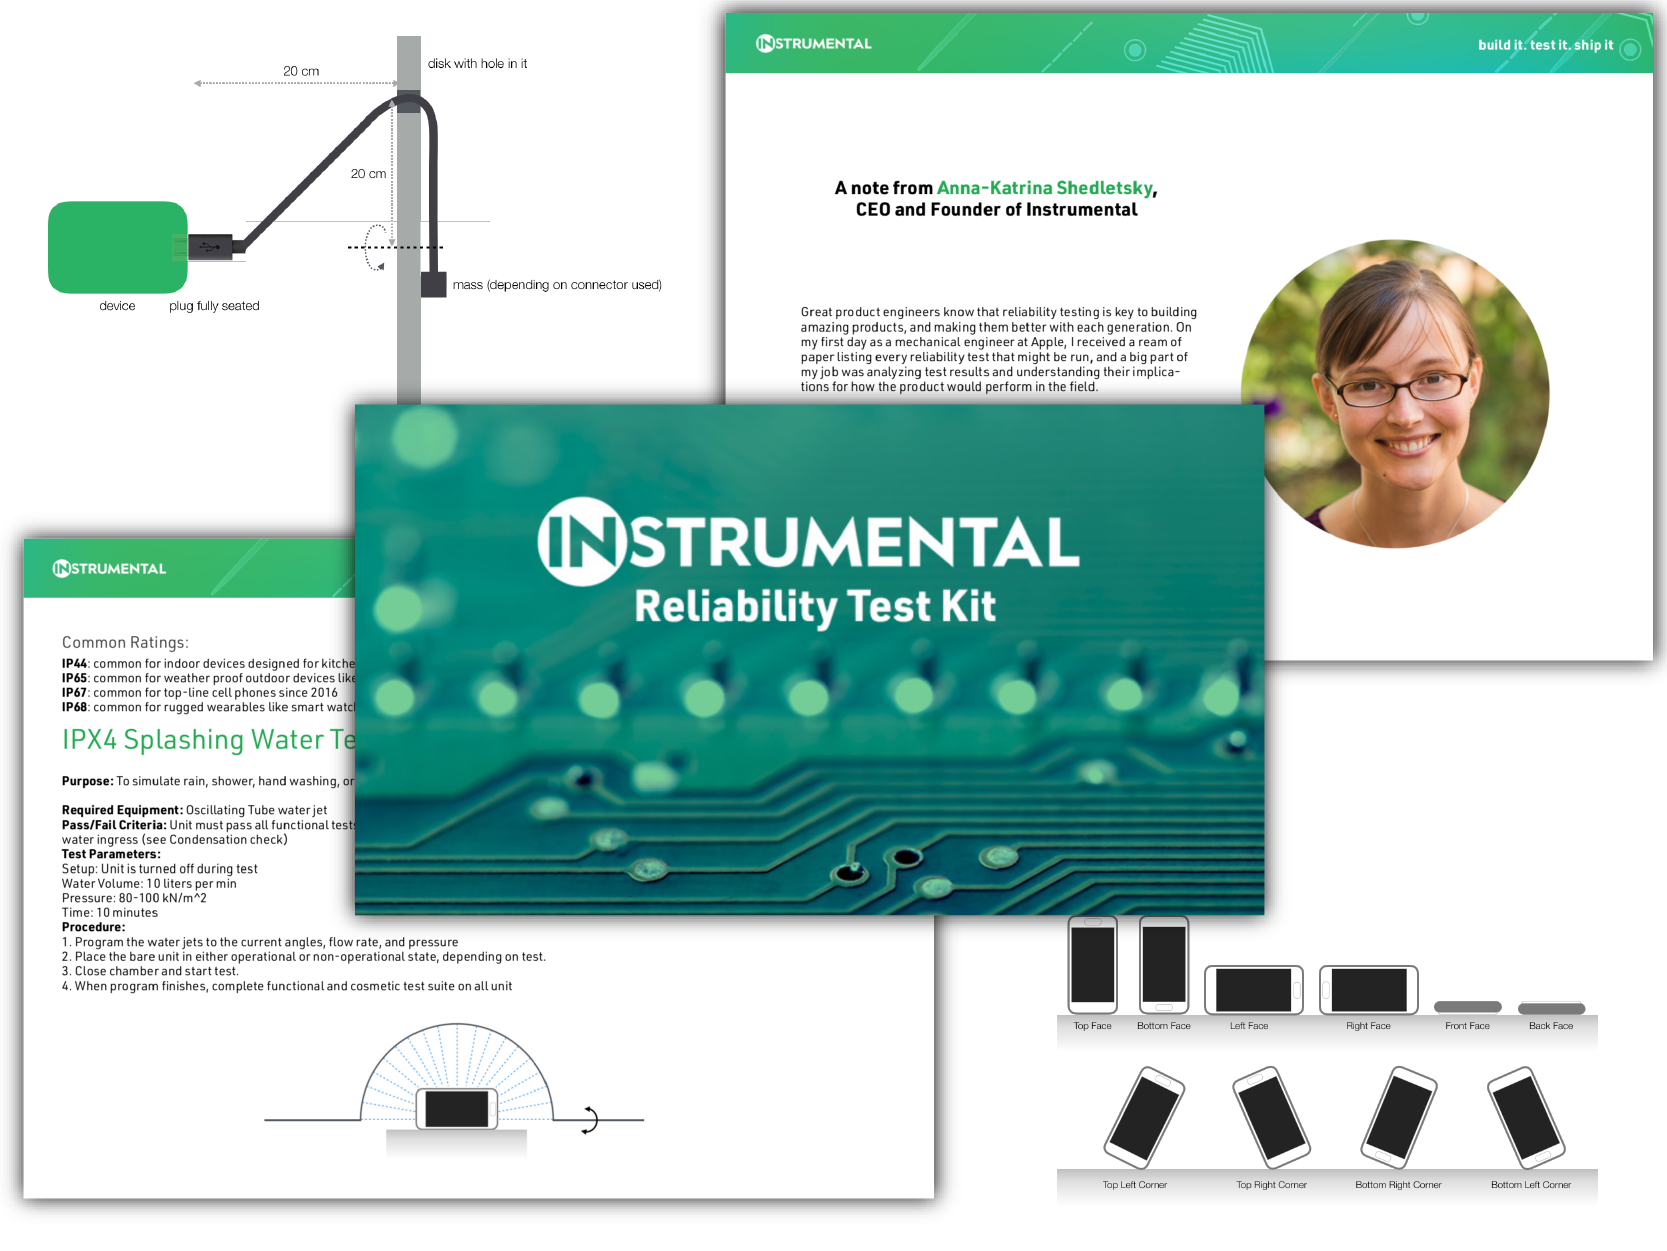 Download the best guide to reliability testing featured image